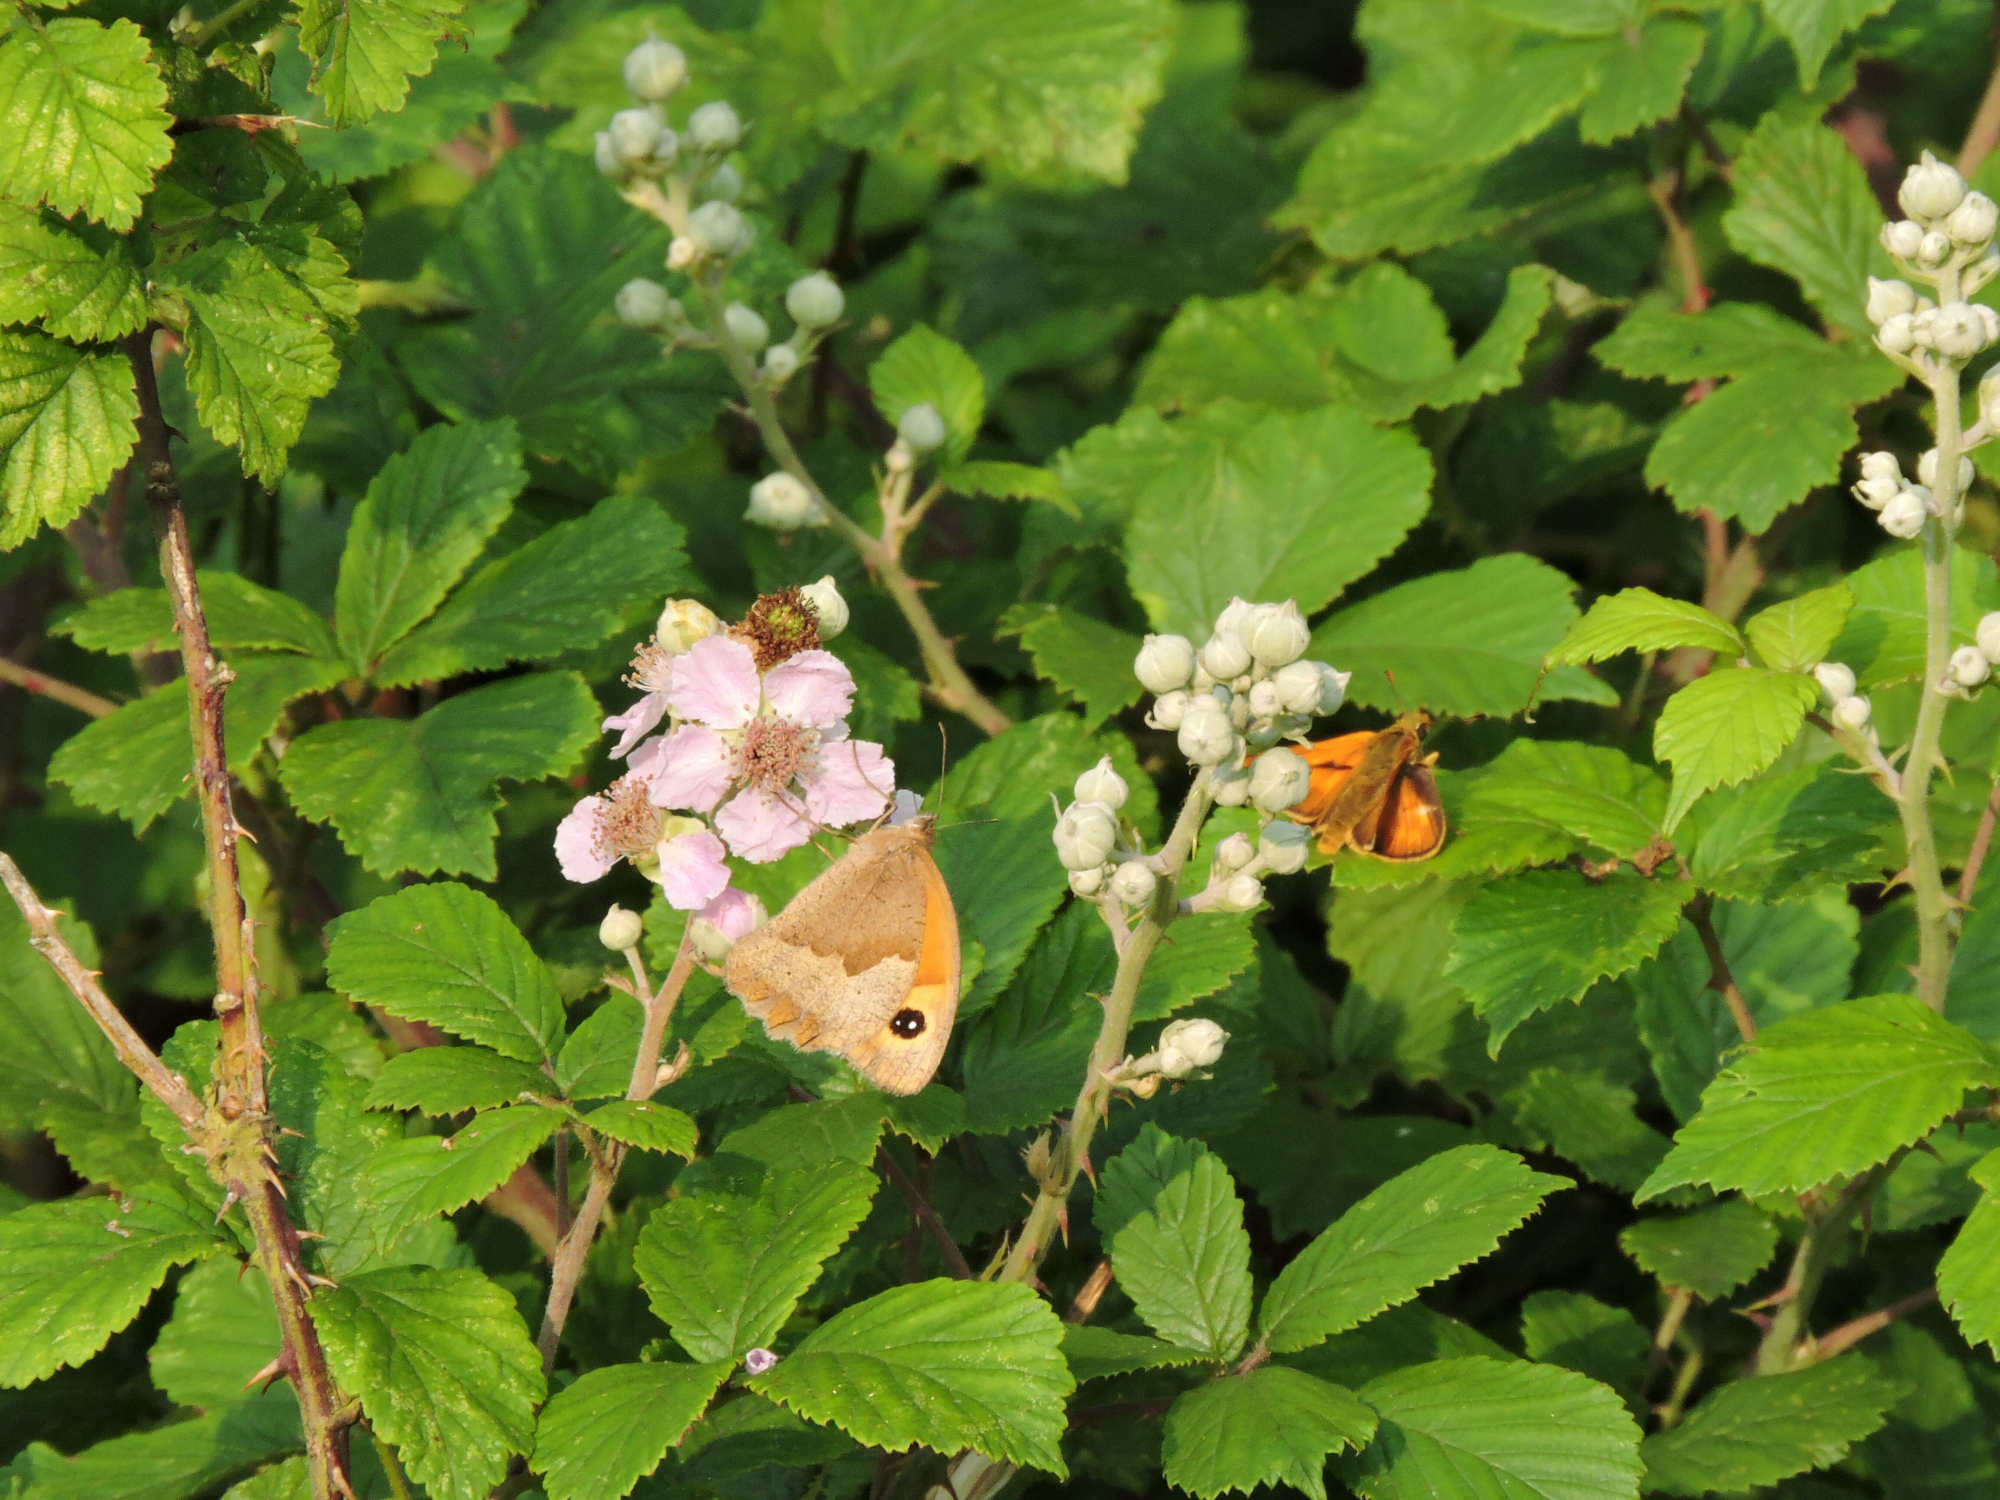 Meadow Brown on bramble with a Small Skipper in the background.